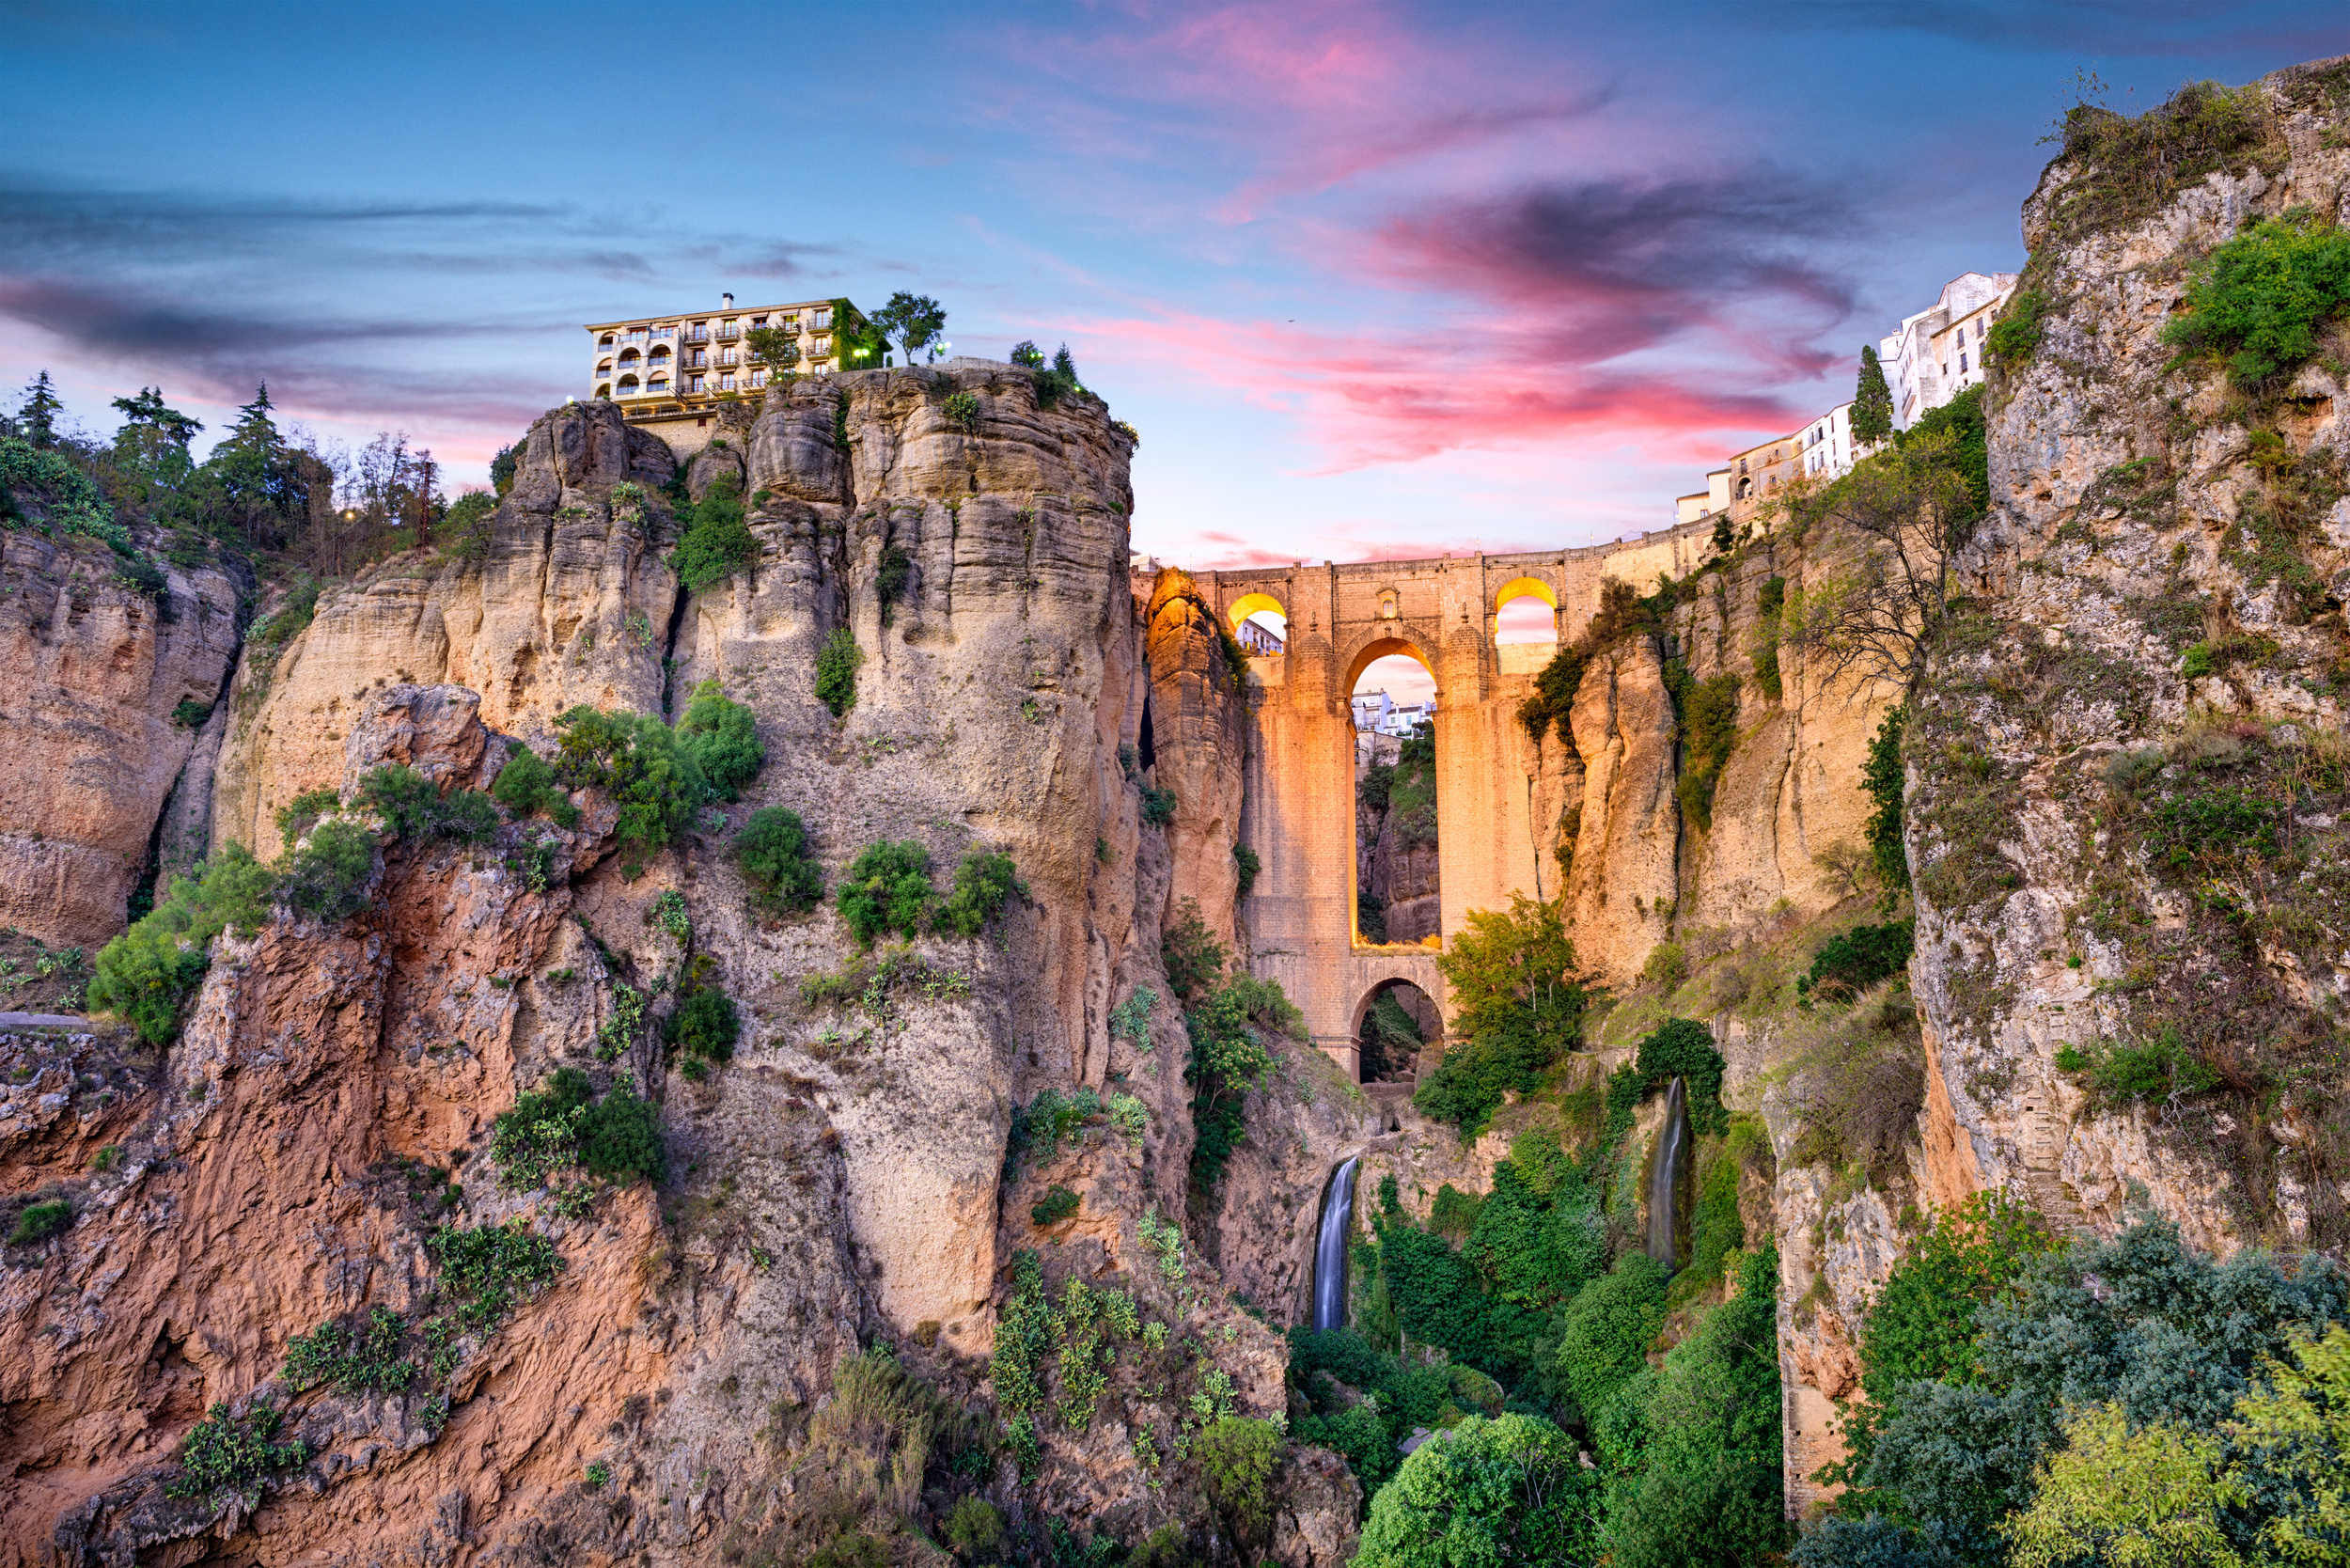 <p>Ronda is a wonderful respite to nearby Malaga. Split by the El Tajo Gorge, the town's dramatic appearance is just one piece of its appeal. Walk the Puente Nuevo, the “New Bridge," and others that connect the two sides of the town. Once you’ve had enough exercise, visit the historic bullring or go wine tasting in the surrounding hillside.</p><p>You may also like: <a href='https://www.yardbarker.com/lifestyle/articles/20_valentines_day_gifts_shell_actually_love_021224/s1__38341527'>20 Valentine's Day gifts she'll actually love</a></p>